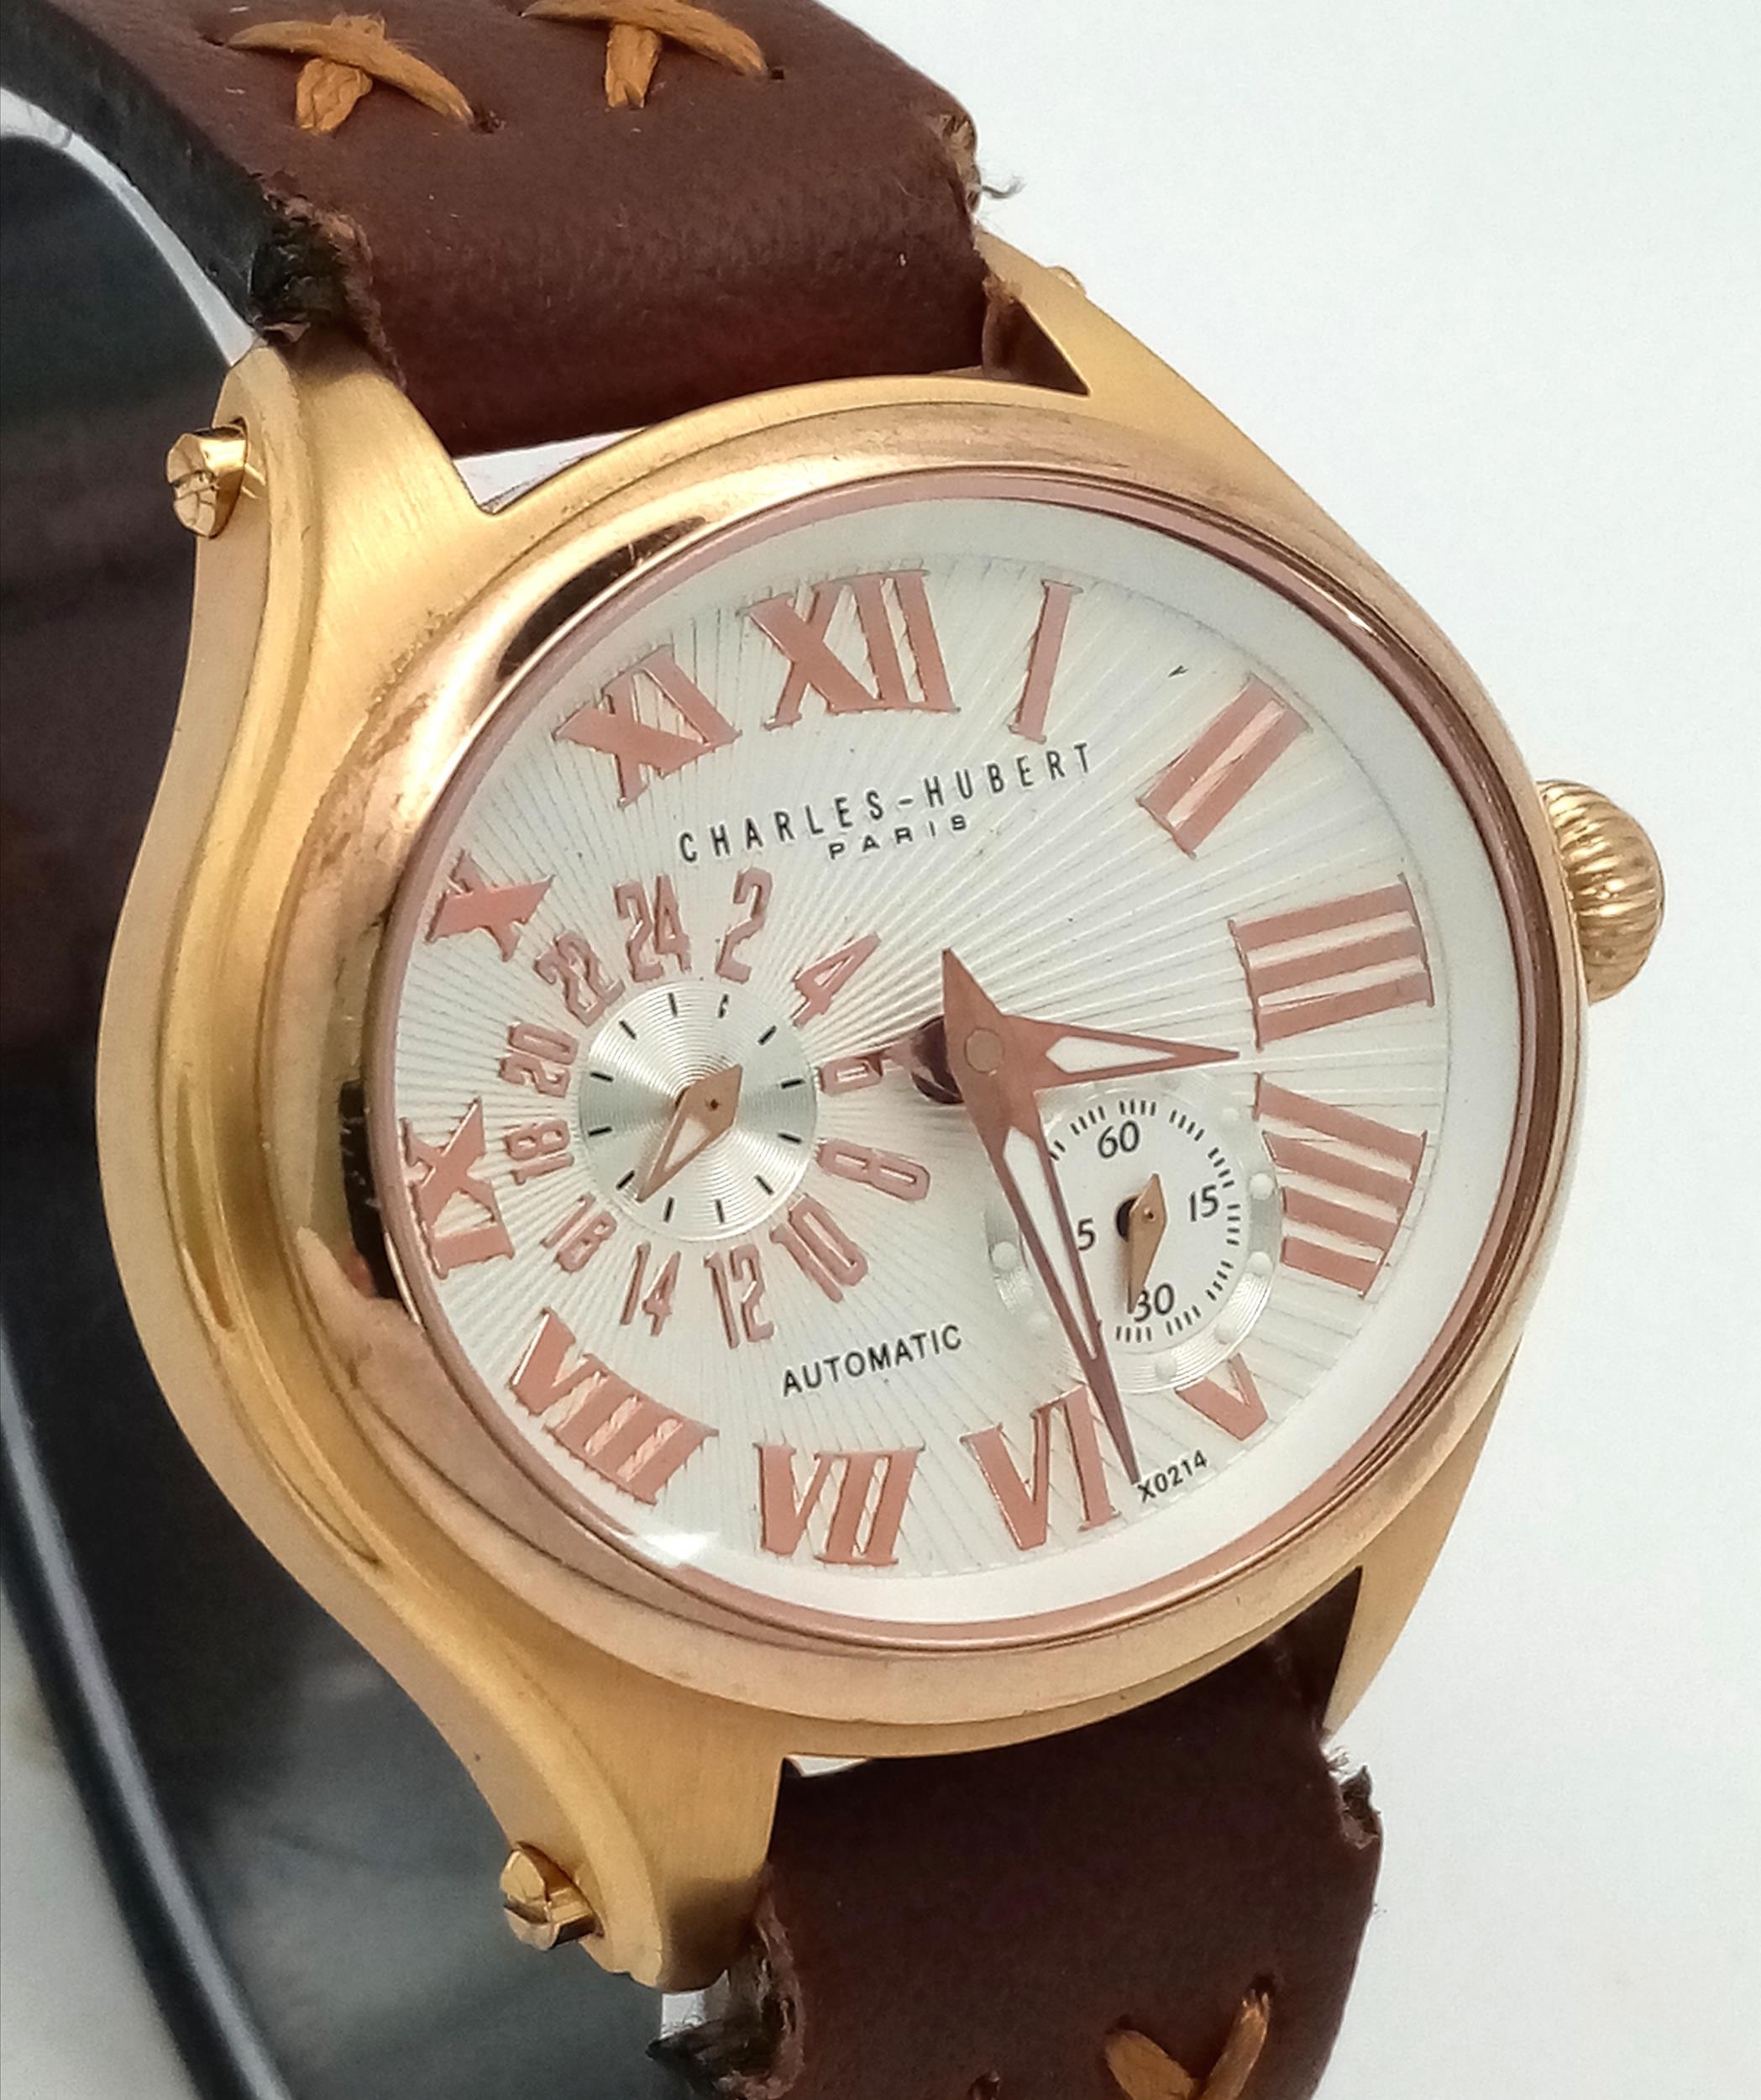 A Charles Hubert Automatic Gents Watch. Brown leather strap. Oval gilded case - 38mm. White dial - Image 3 of 5